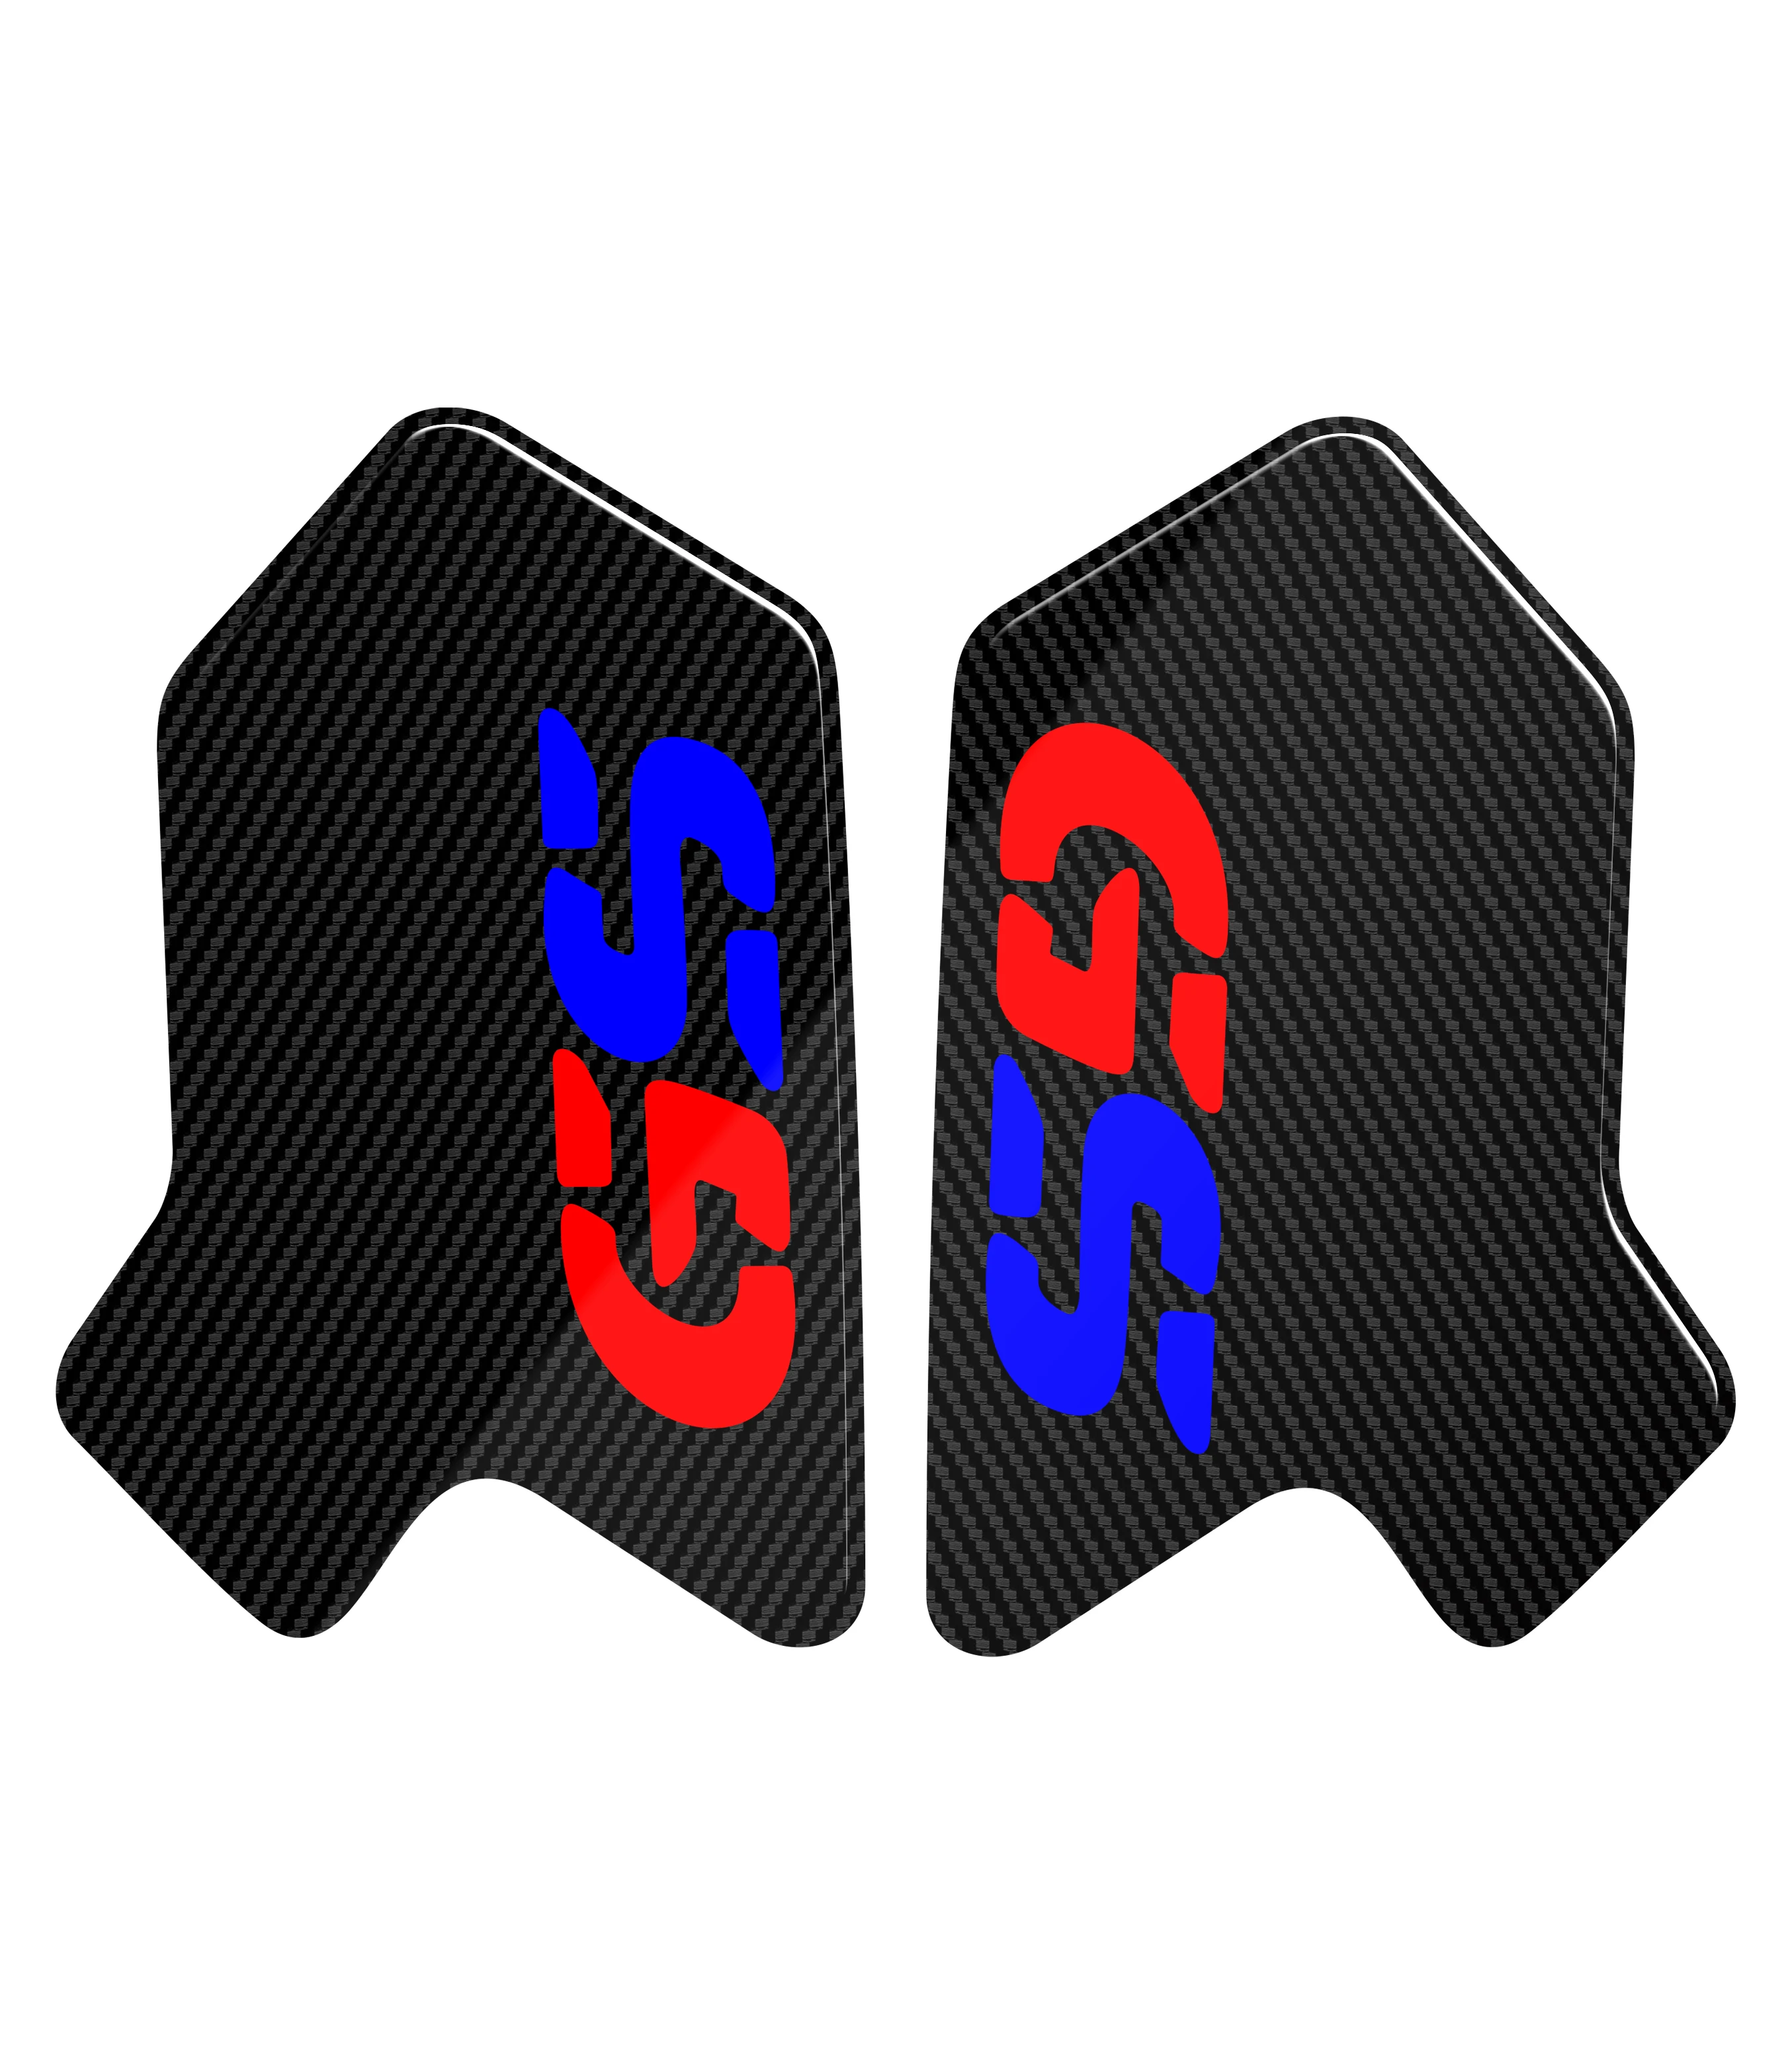 motorcycle tank pad sticker gas oil cover protection decal accessories for bmw r1200gs r1250gs adventure20 21 adv 40 years gs For BMW Motorrad R1200GS 2014-2018 / R1250GS ADV 2019-2022 Motorcycle Accessorie Side Tank Pad Protection Knee Grip Traction